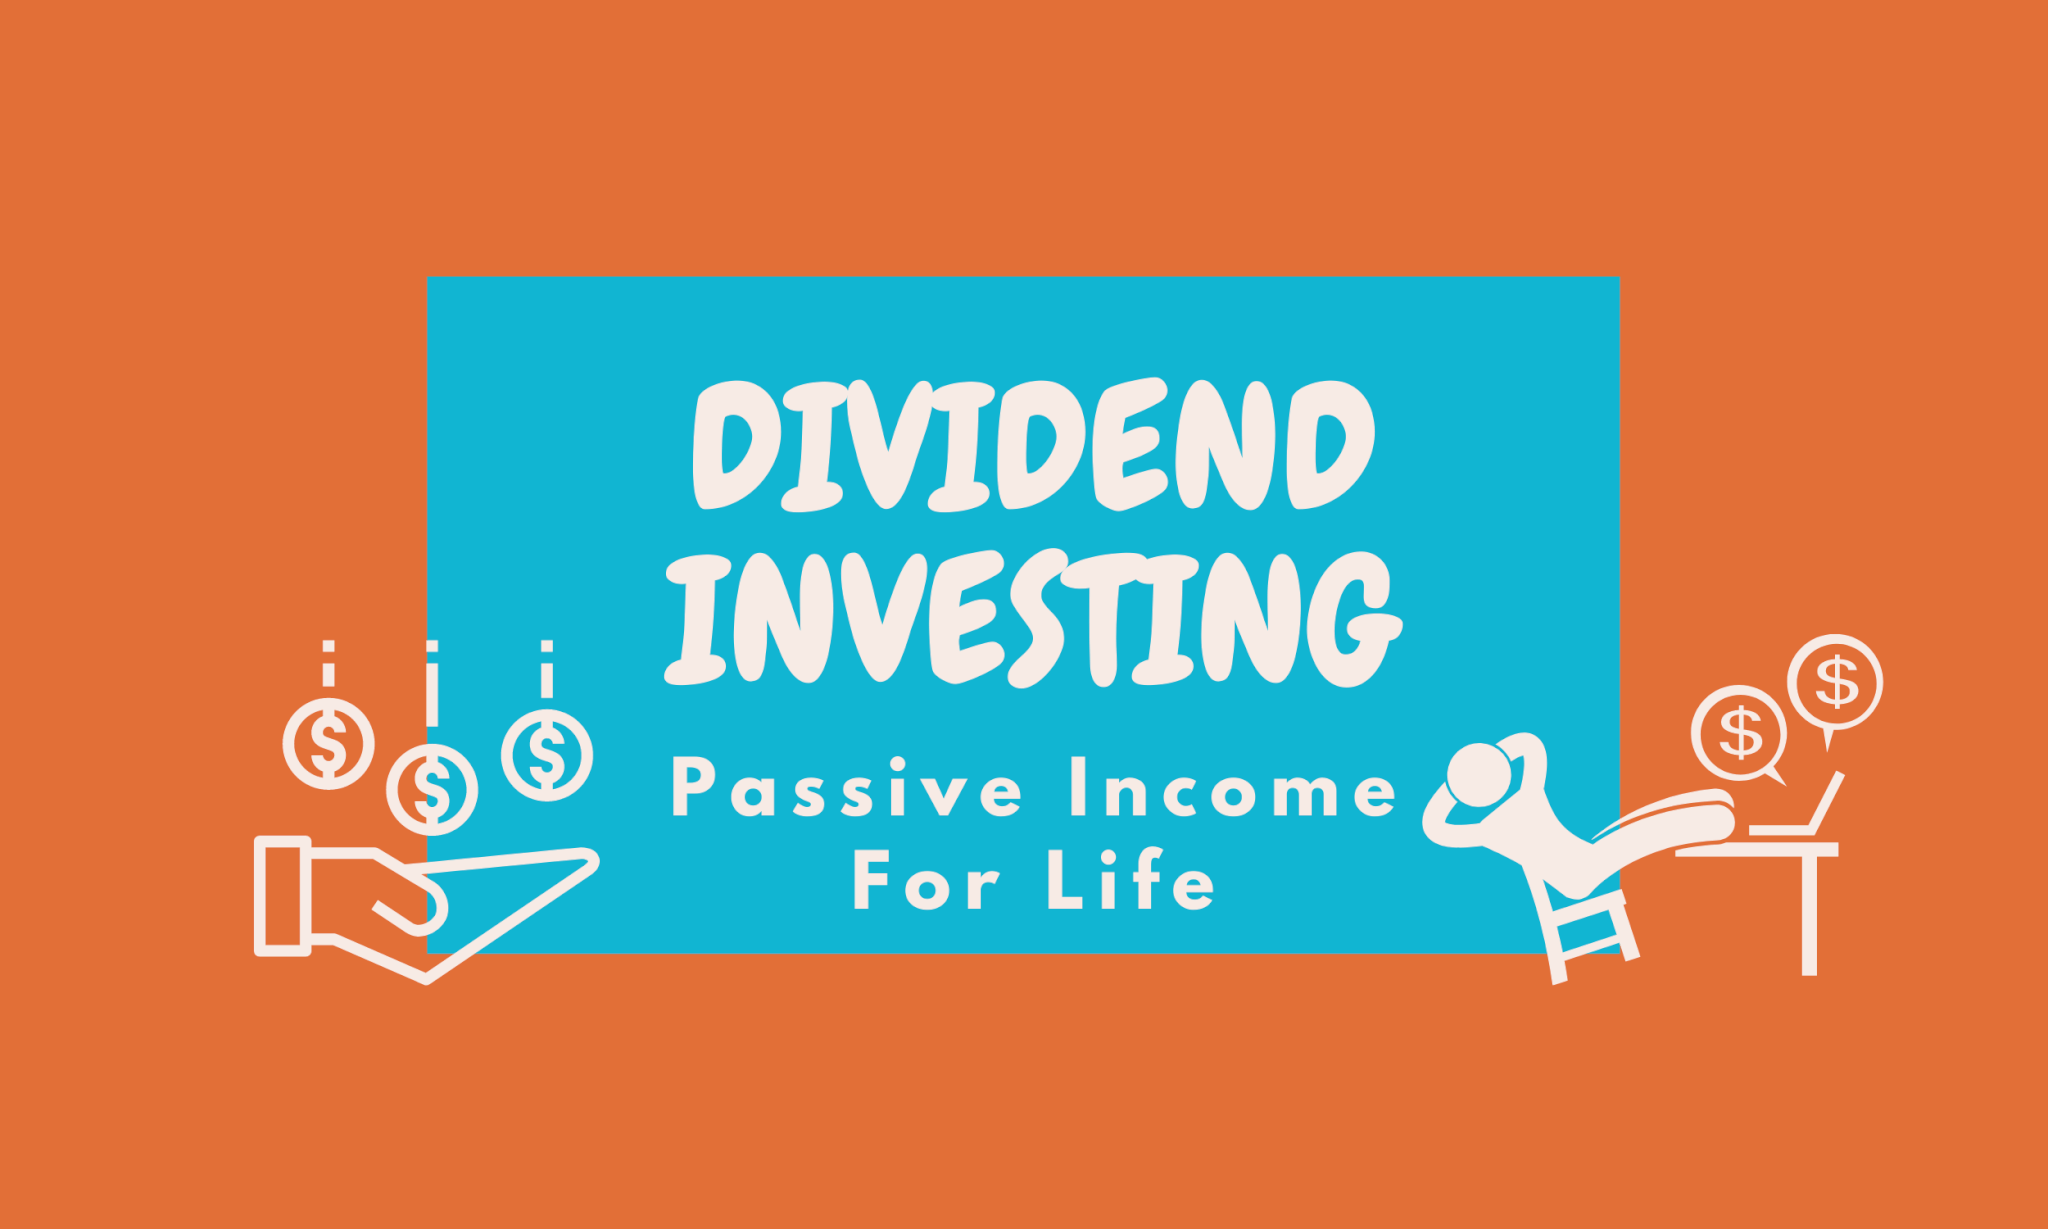 Dividend Investing: Passive Income for Life